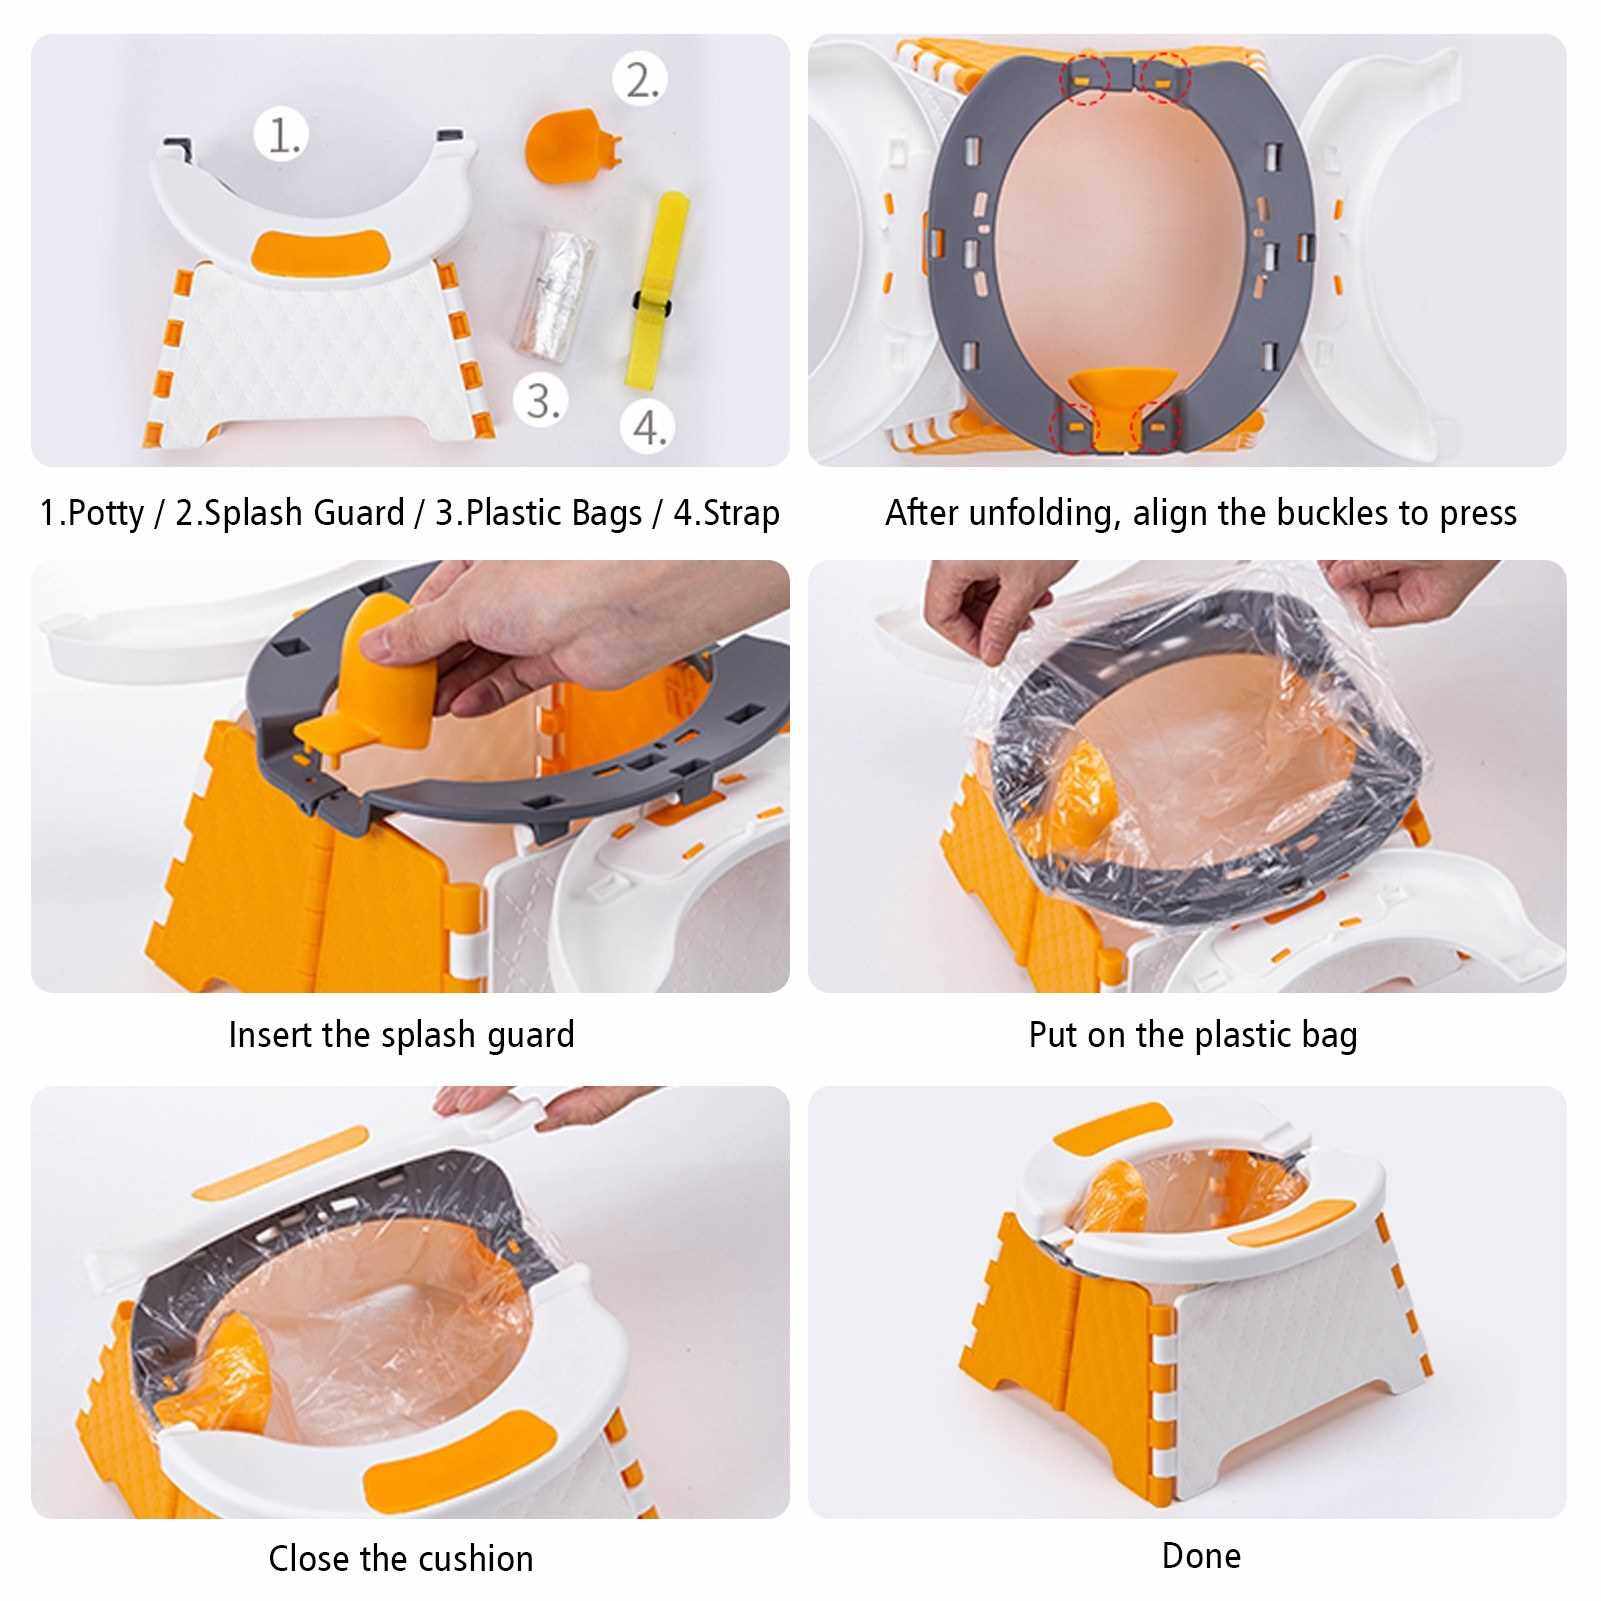 Foldable Toilet Trainer Kids Travel Potty Toilet Seat Baby Potty Seat with Splash Guard 30 Plastic Bags Storage Bag Portable Potty Training Seat for Home Travel On-The-Go Indoor Outdoor (Orange)